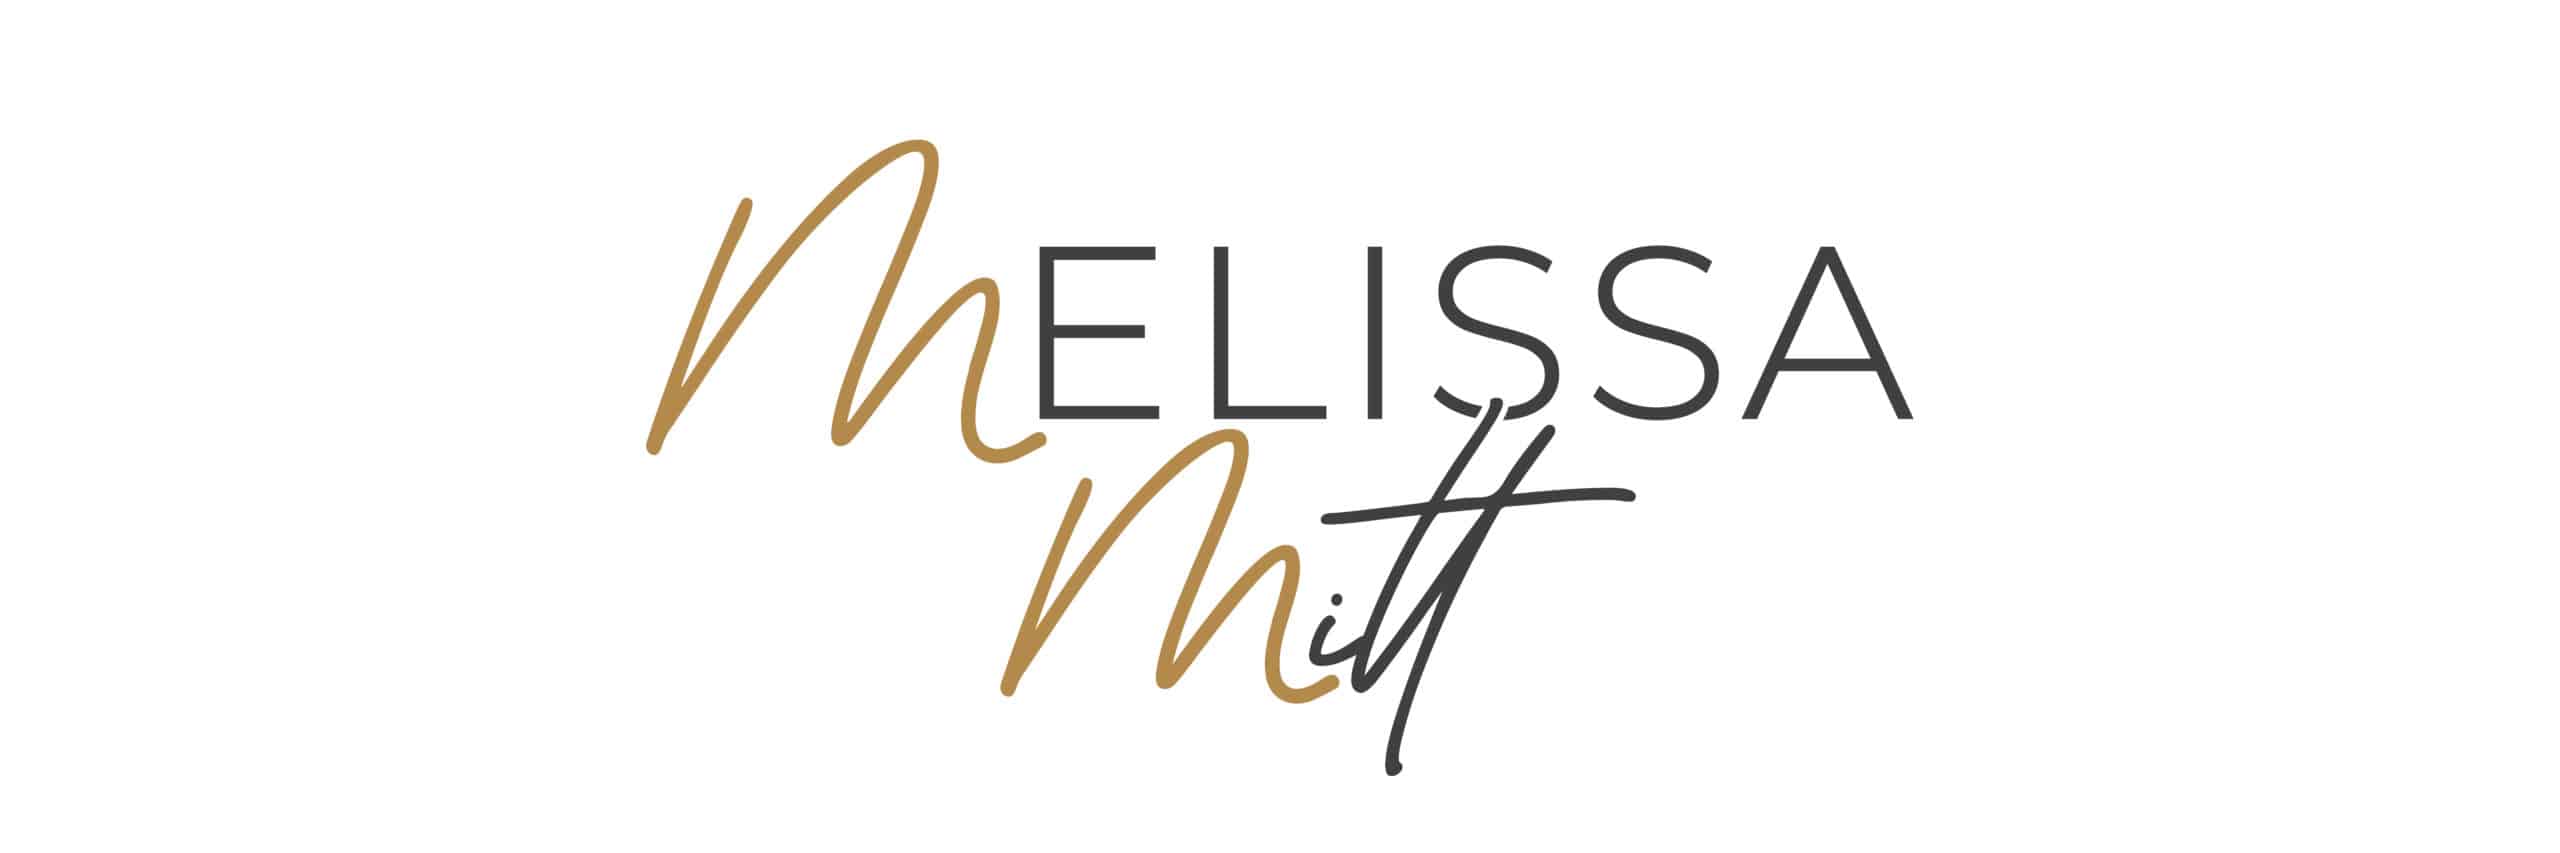 Elegant script logo with the name 'melissa matt' in sophisticated black and gold lettering.